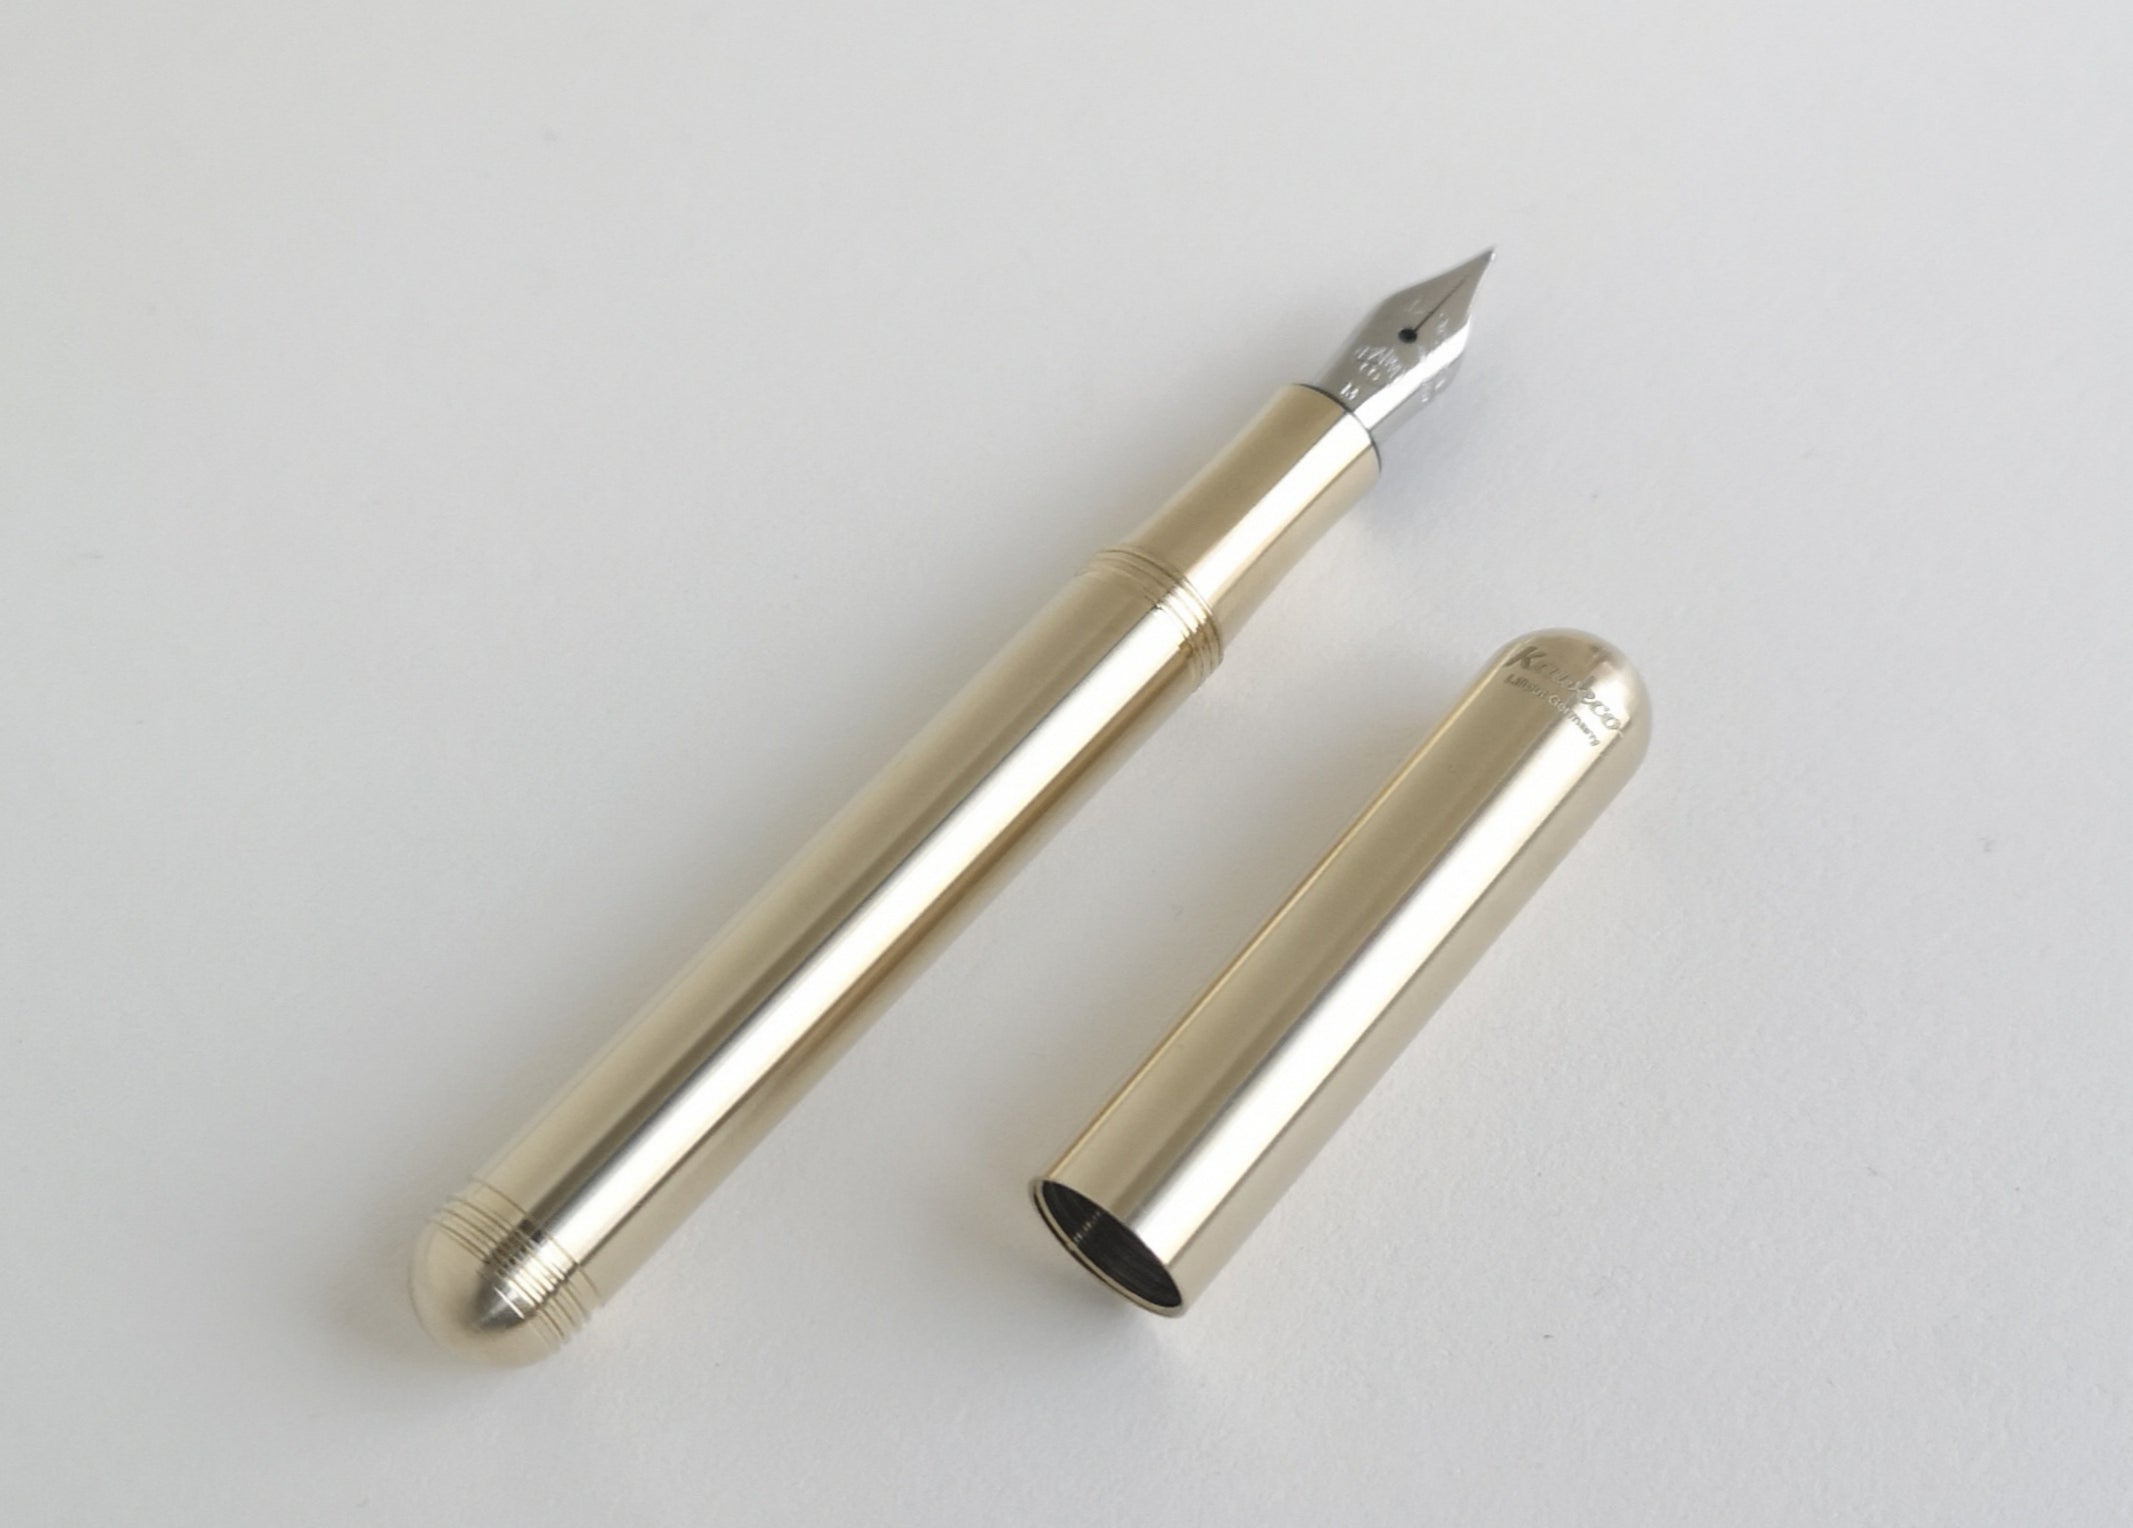 Kaweco Brass Liliput Fountain Pen with cap by side